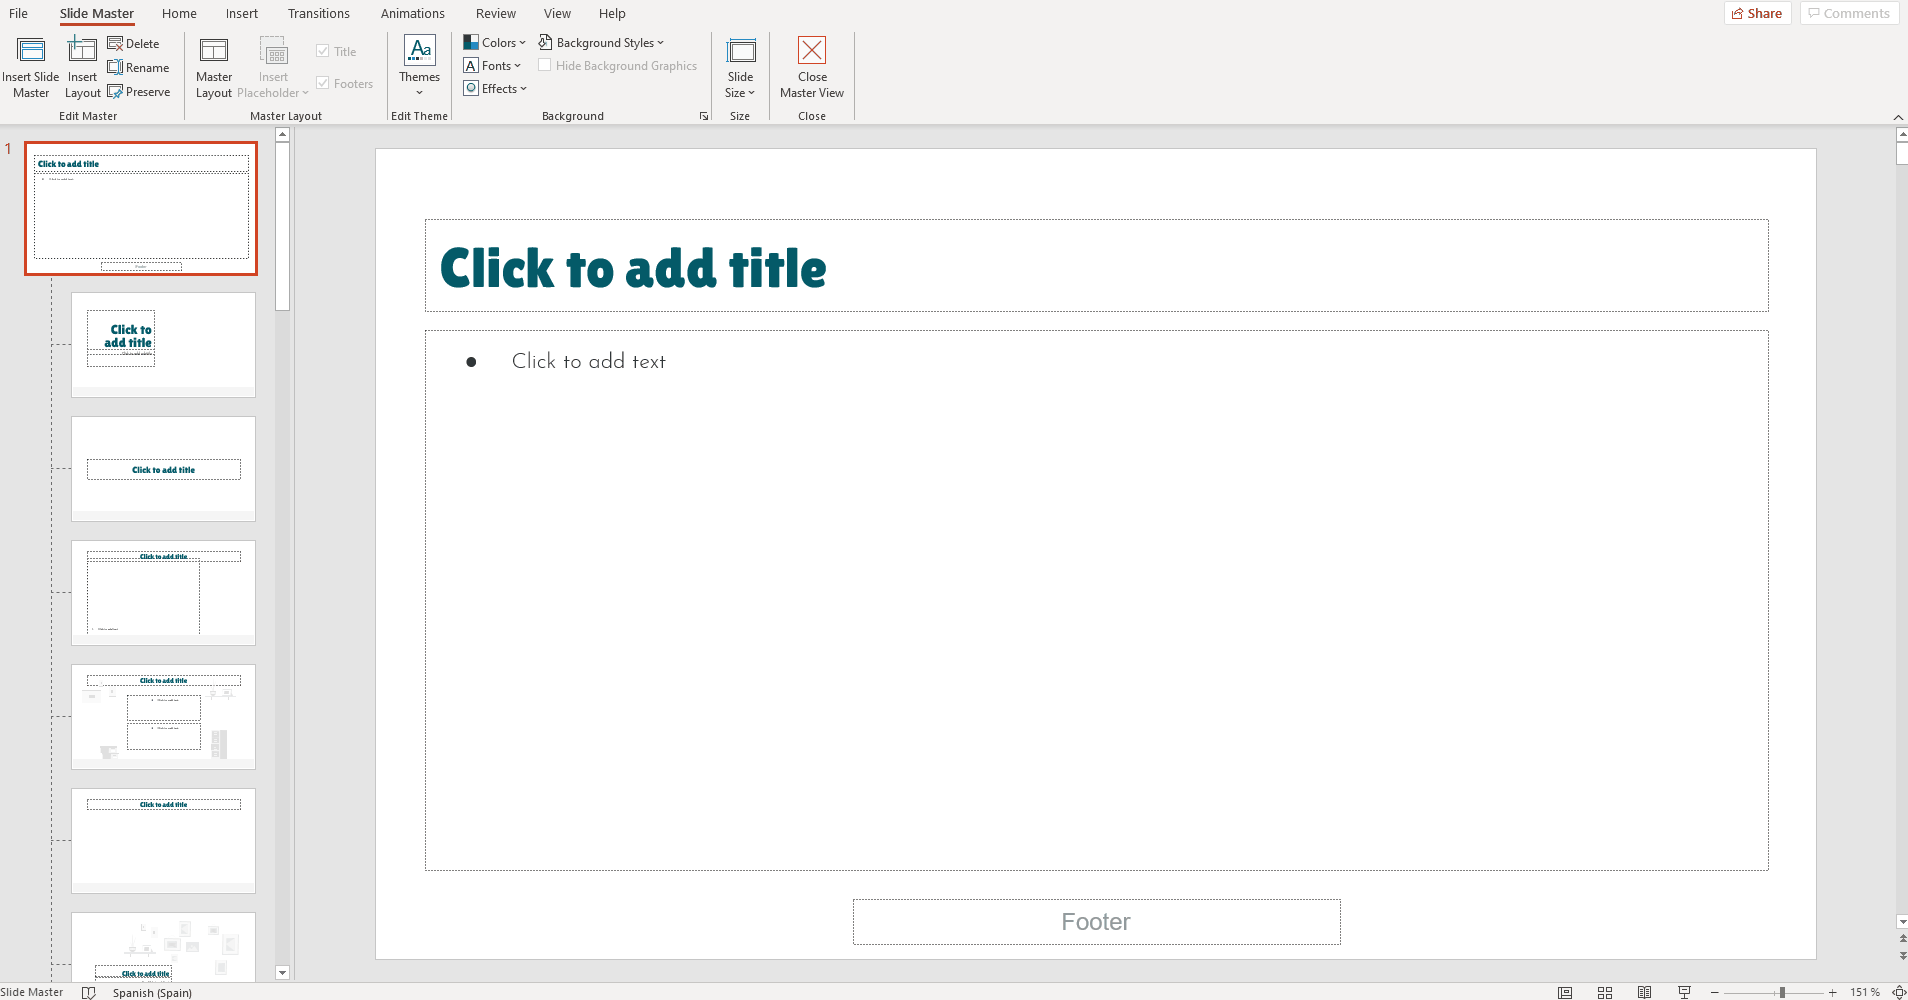 How to Add Footers in PowerPoint -10